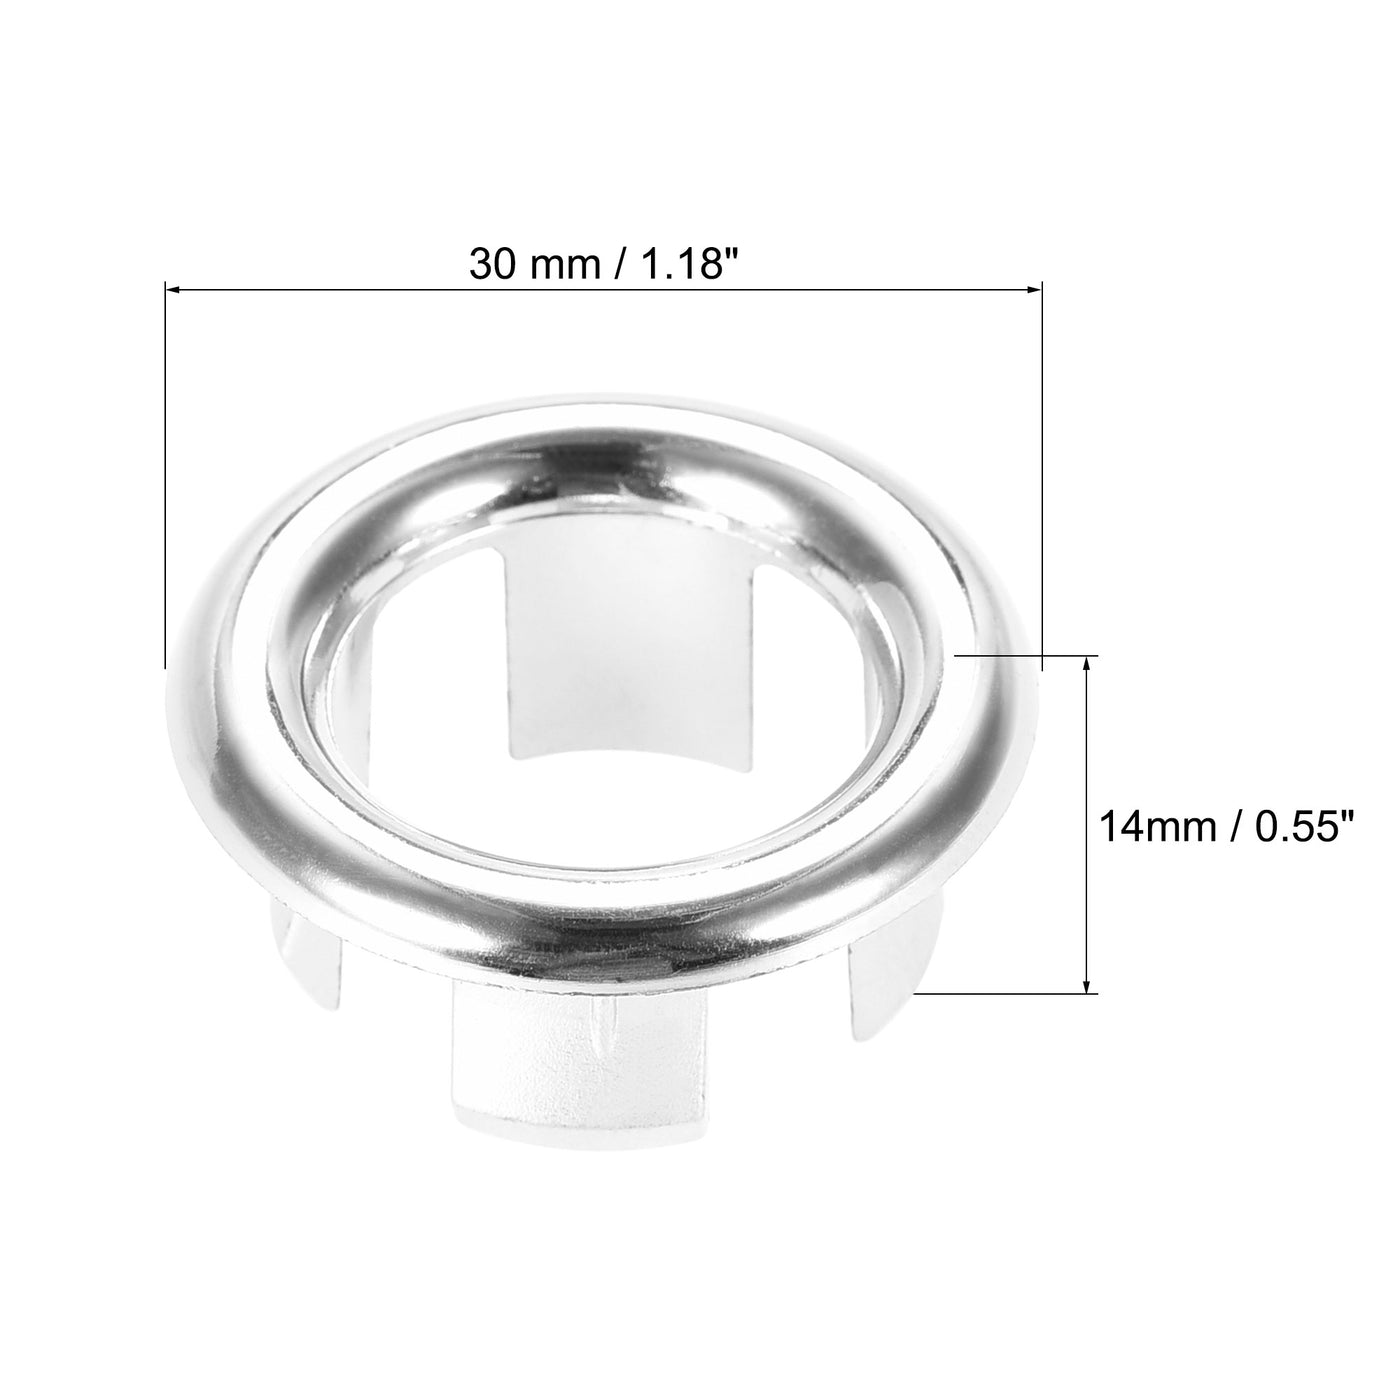 uxcell Uxcell Sink Basin Trim Overflow Cover Insert in Hole Ring Covers Caps Silver Tone 6pcs